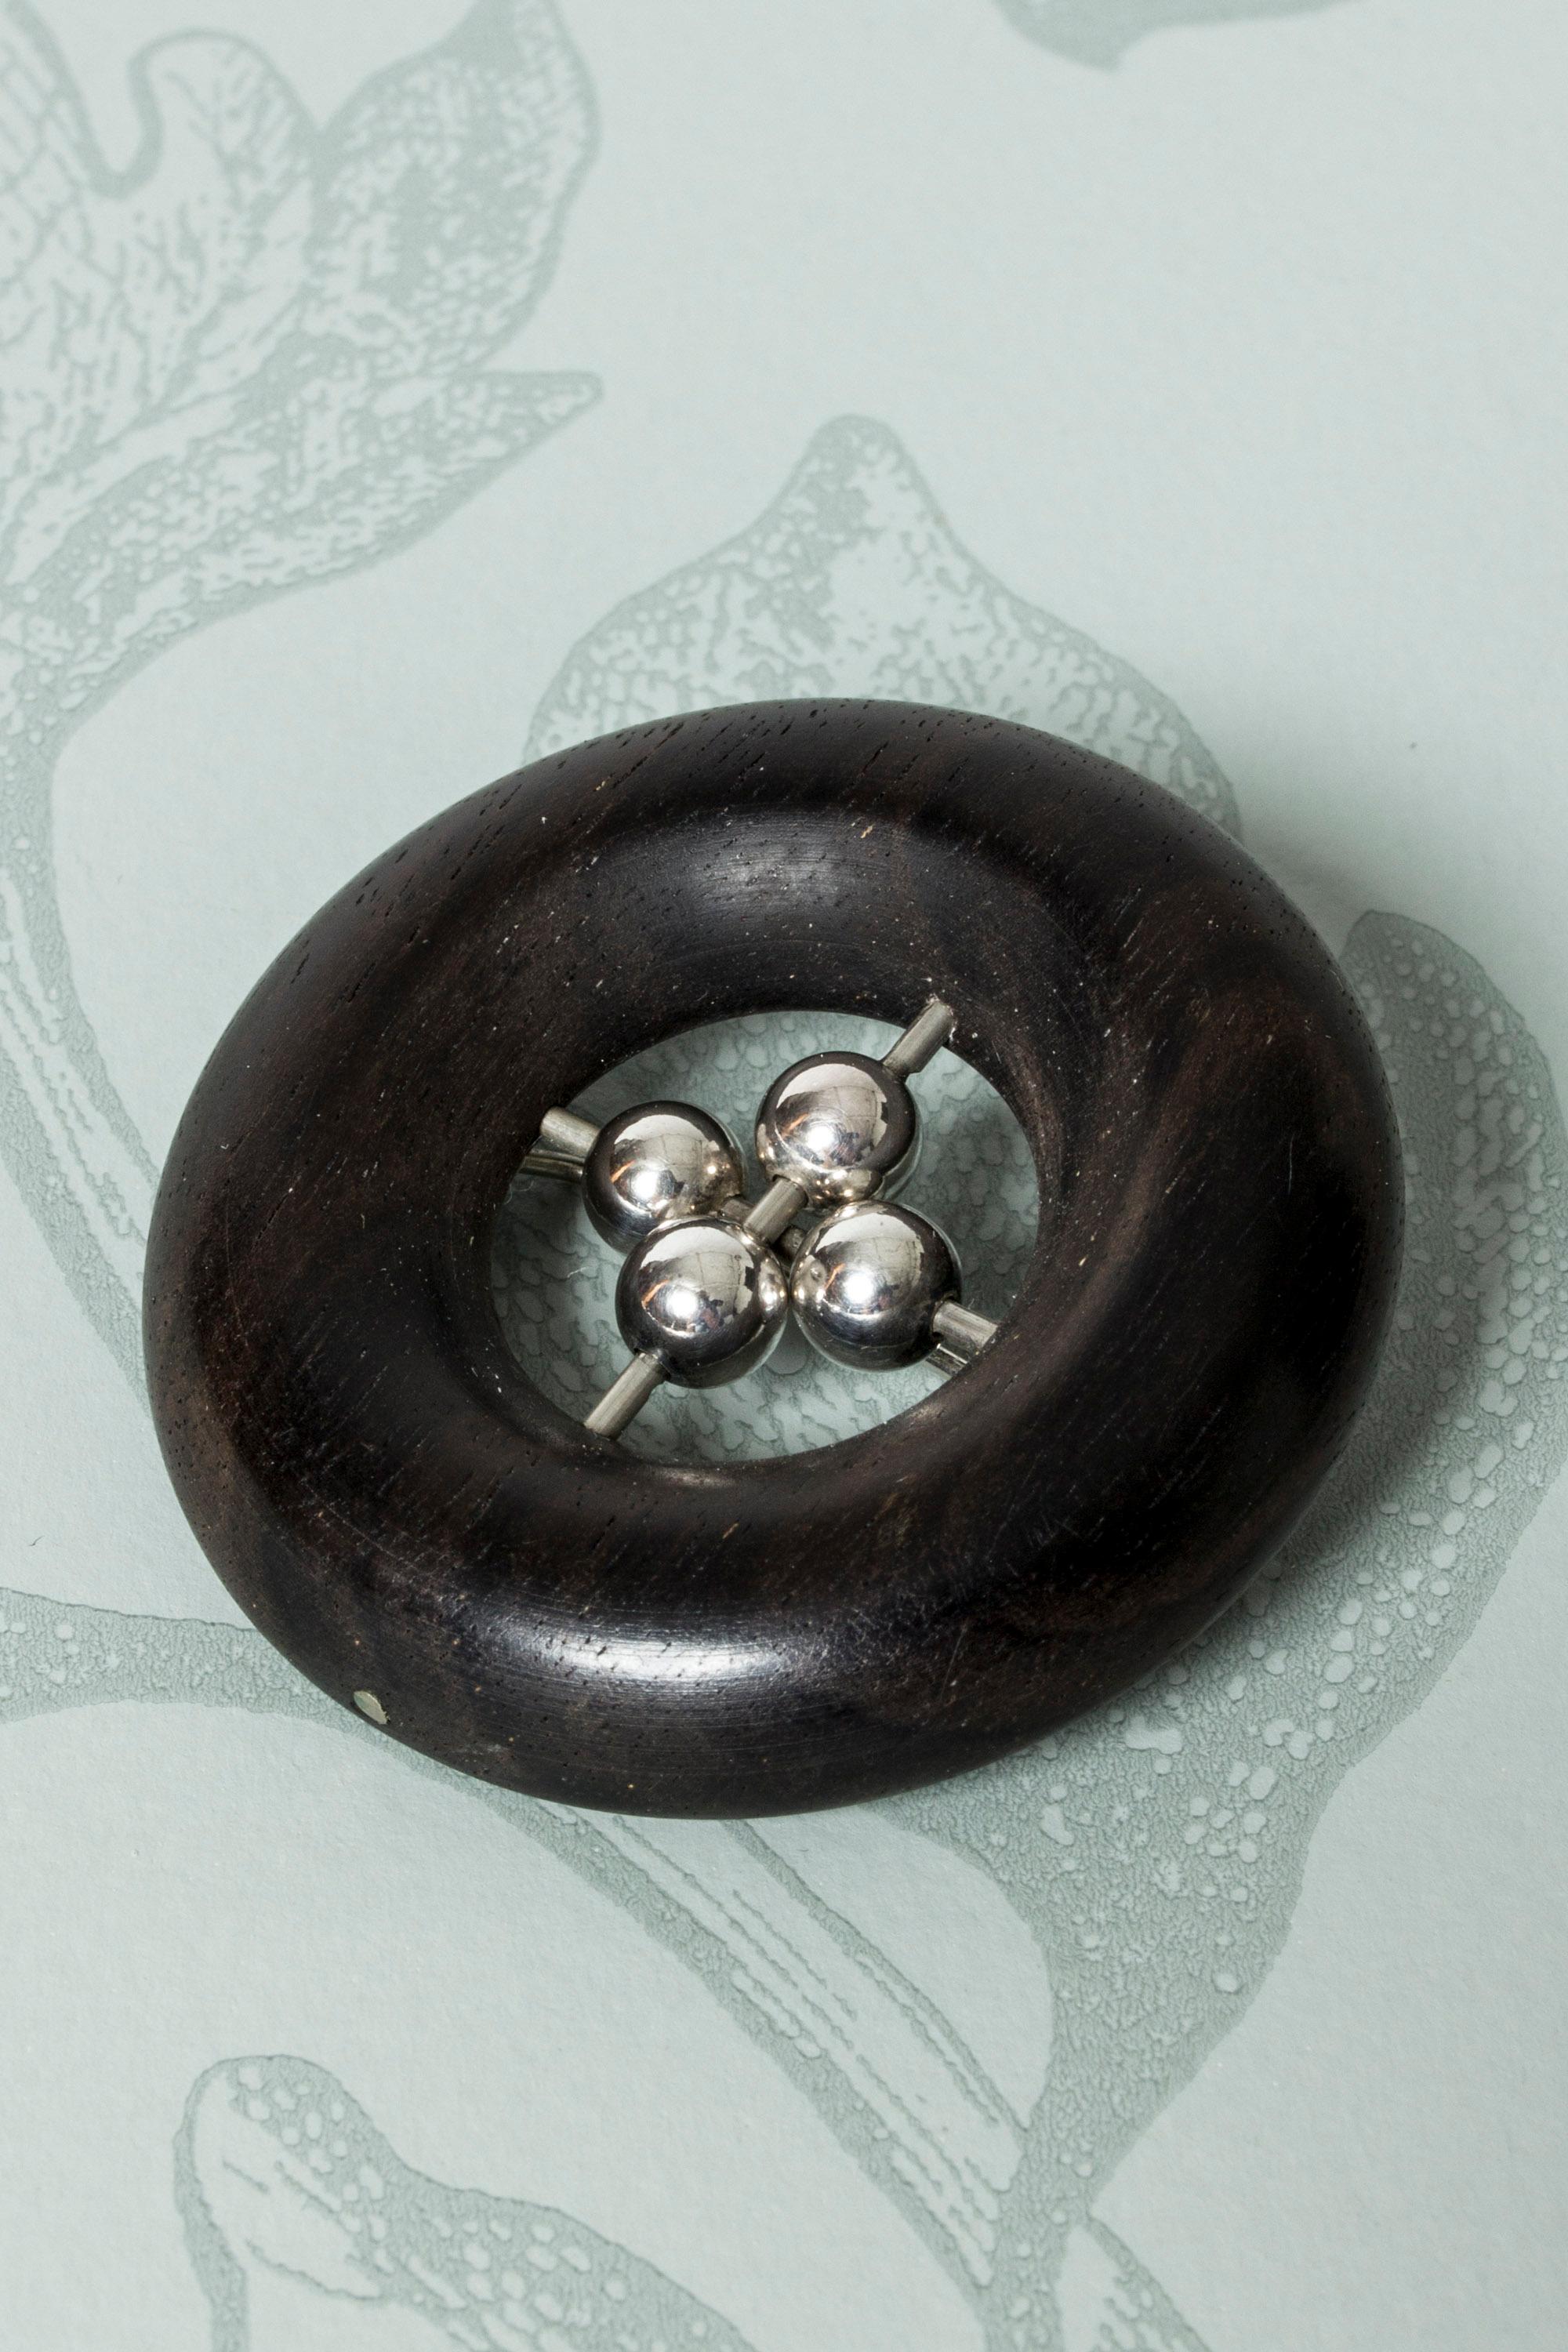 Silver and ebony brooch from Aarikka, in a clean design with an appealing swell to the ebony ring. Cool, graphic look.